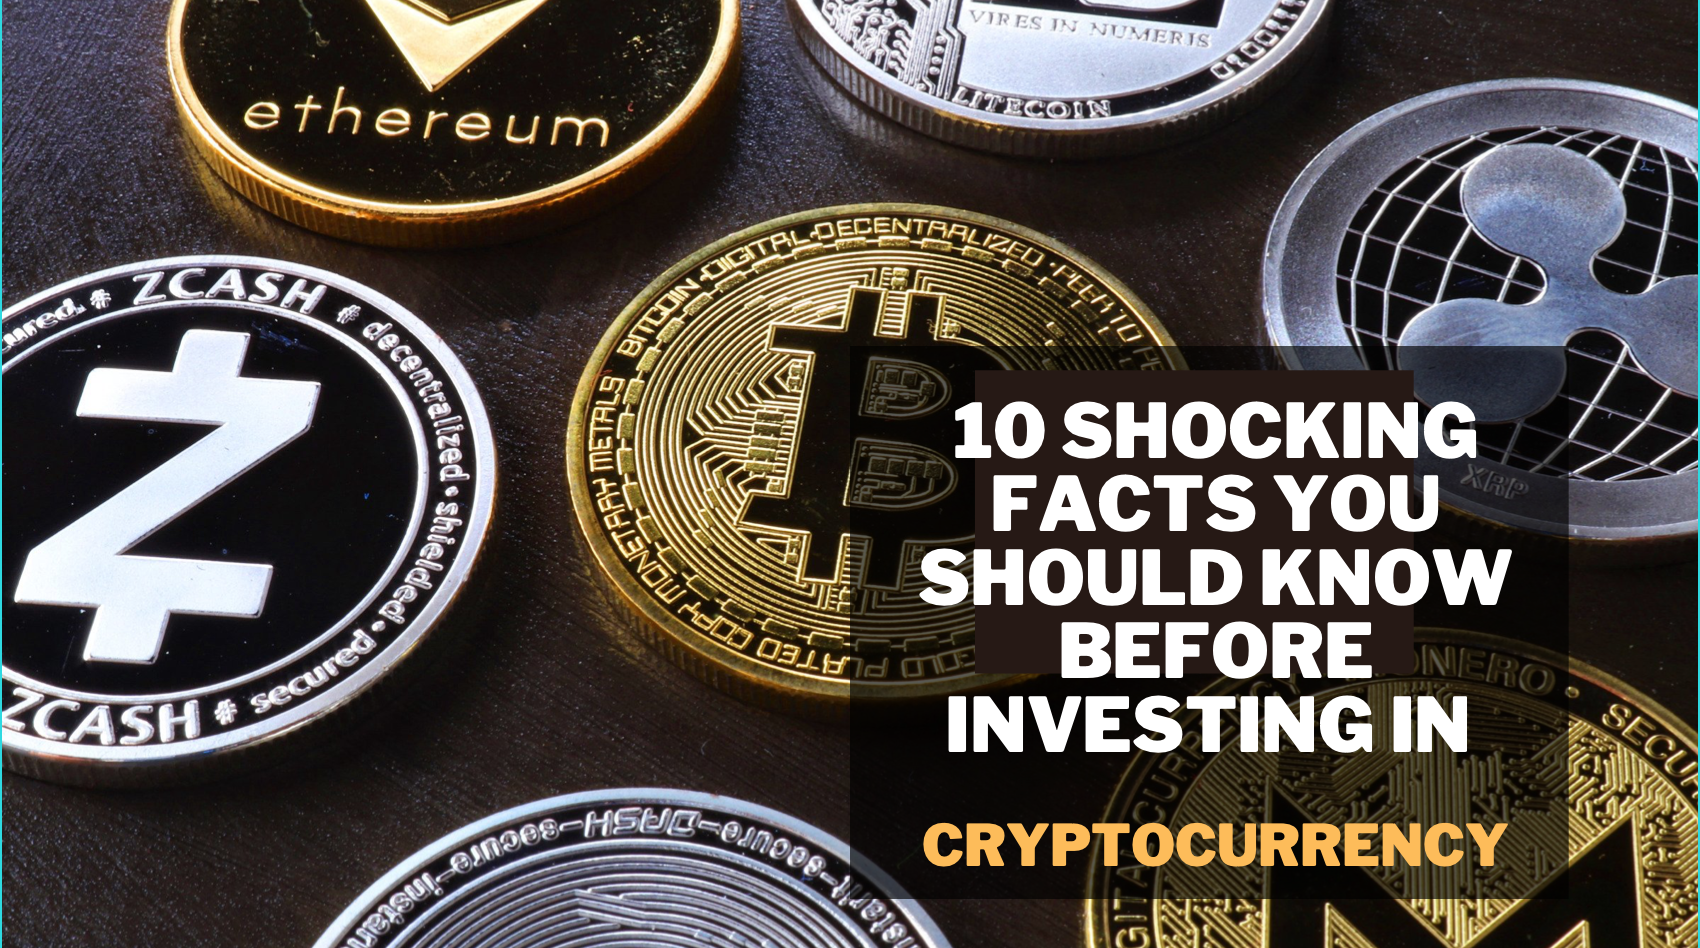 10 Shocking Facts You Should Know Before Investing in Cryptocurrency